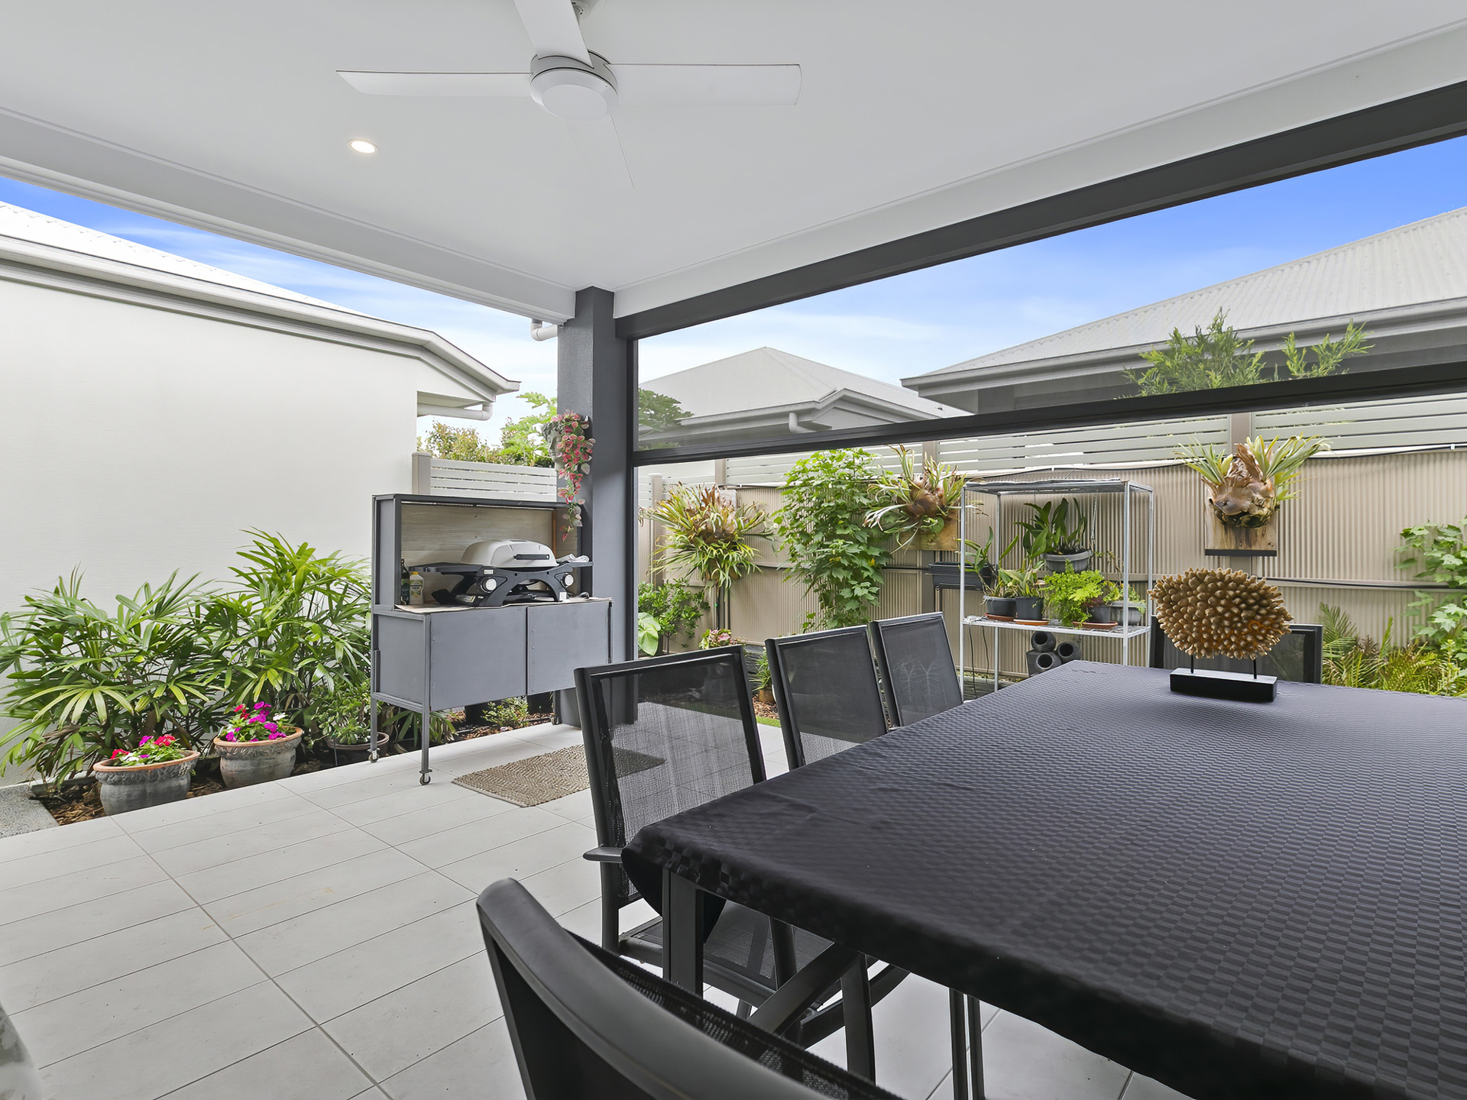 outdoor covered patio area with light tiles, dark dinign setting and barbeque.